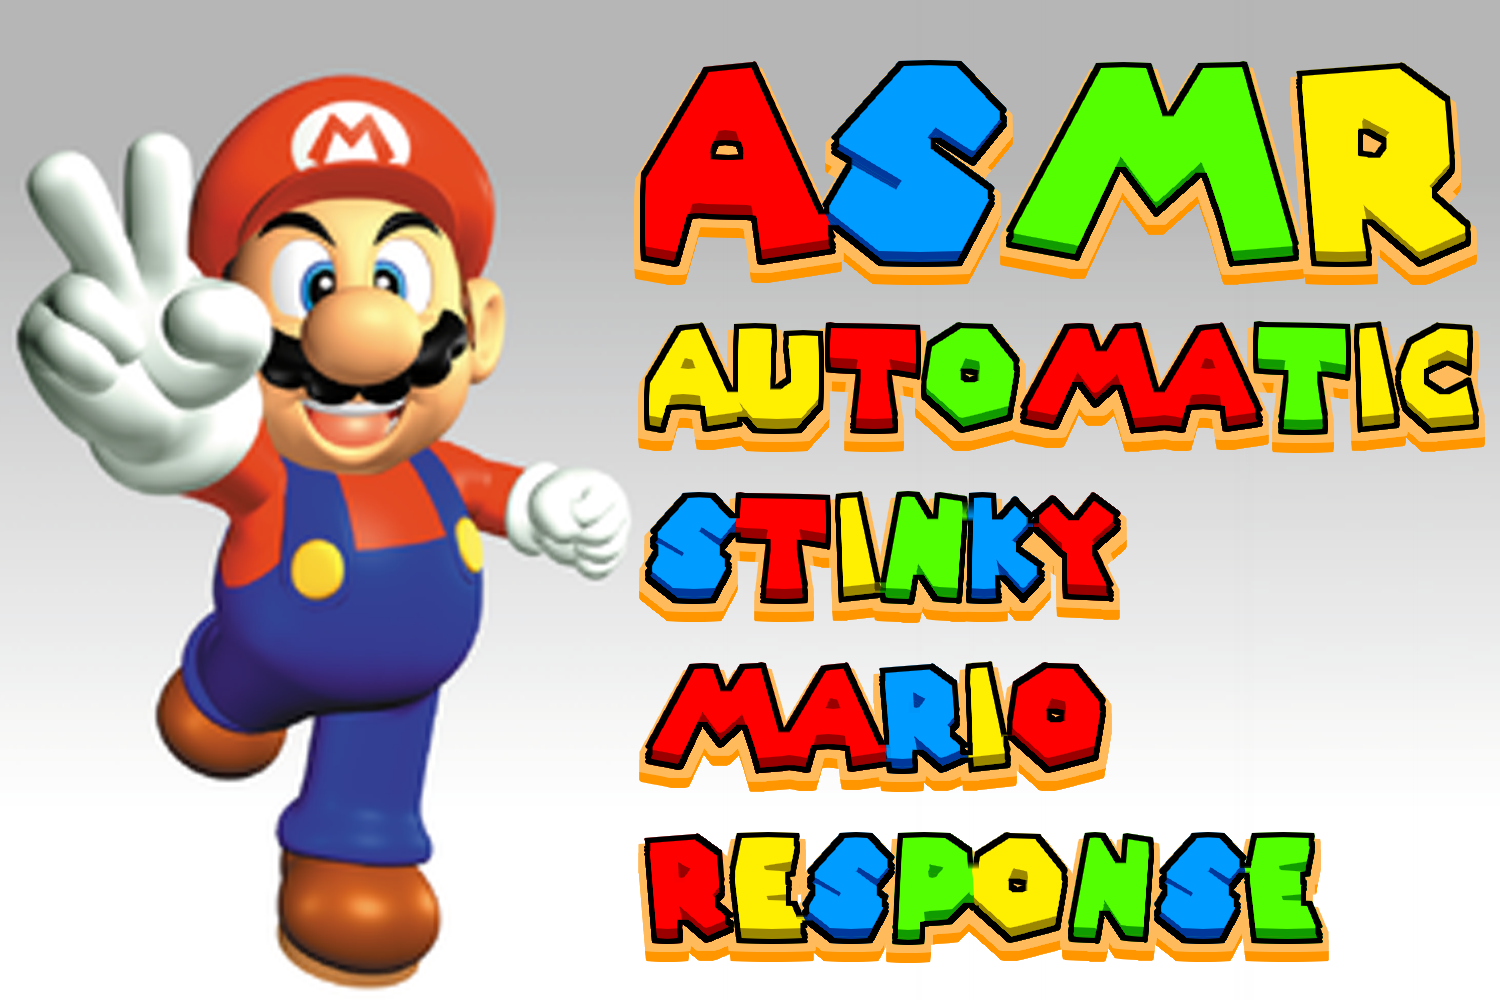 3d render of mario with an excited face and peace sign on a white=grey gradient background. the text on the right says ASMR: Automatic Stinky Mario Response in a style that replicates the mario logo color and font.